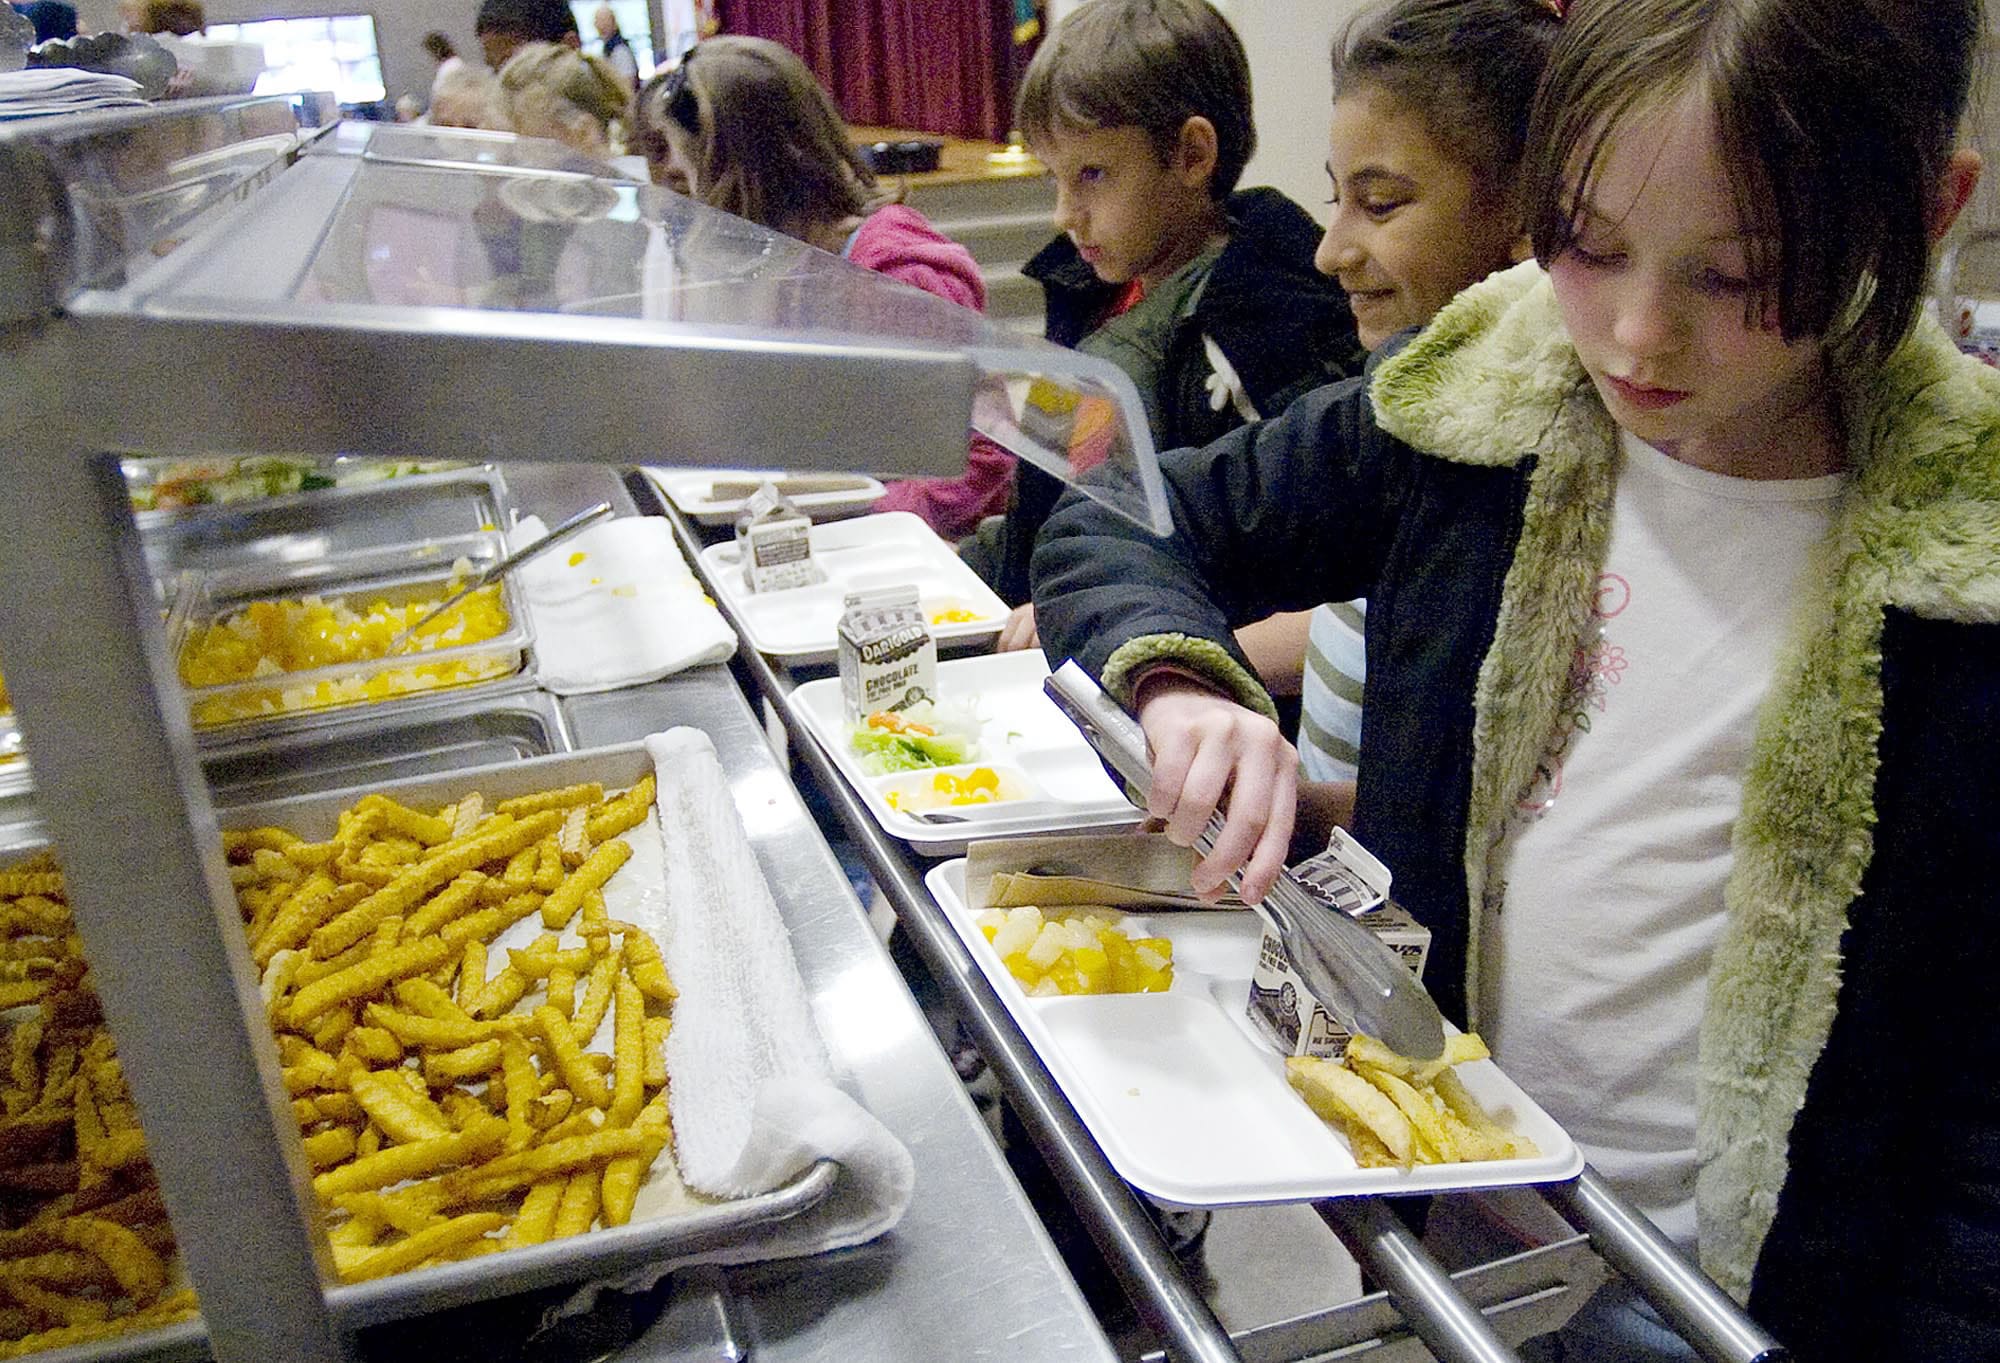 A student adds some French fries to her lunch tray. New U.S.